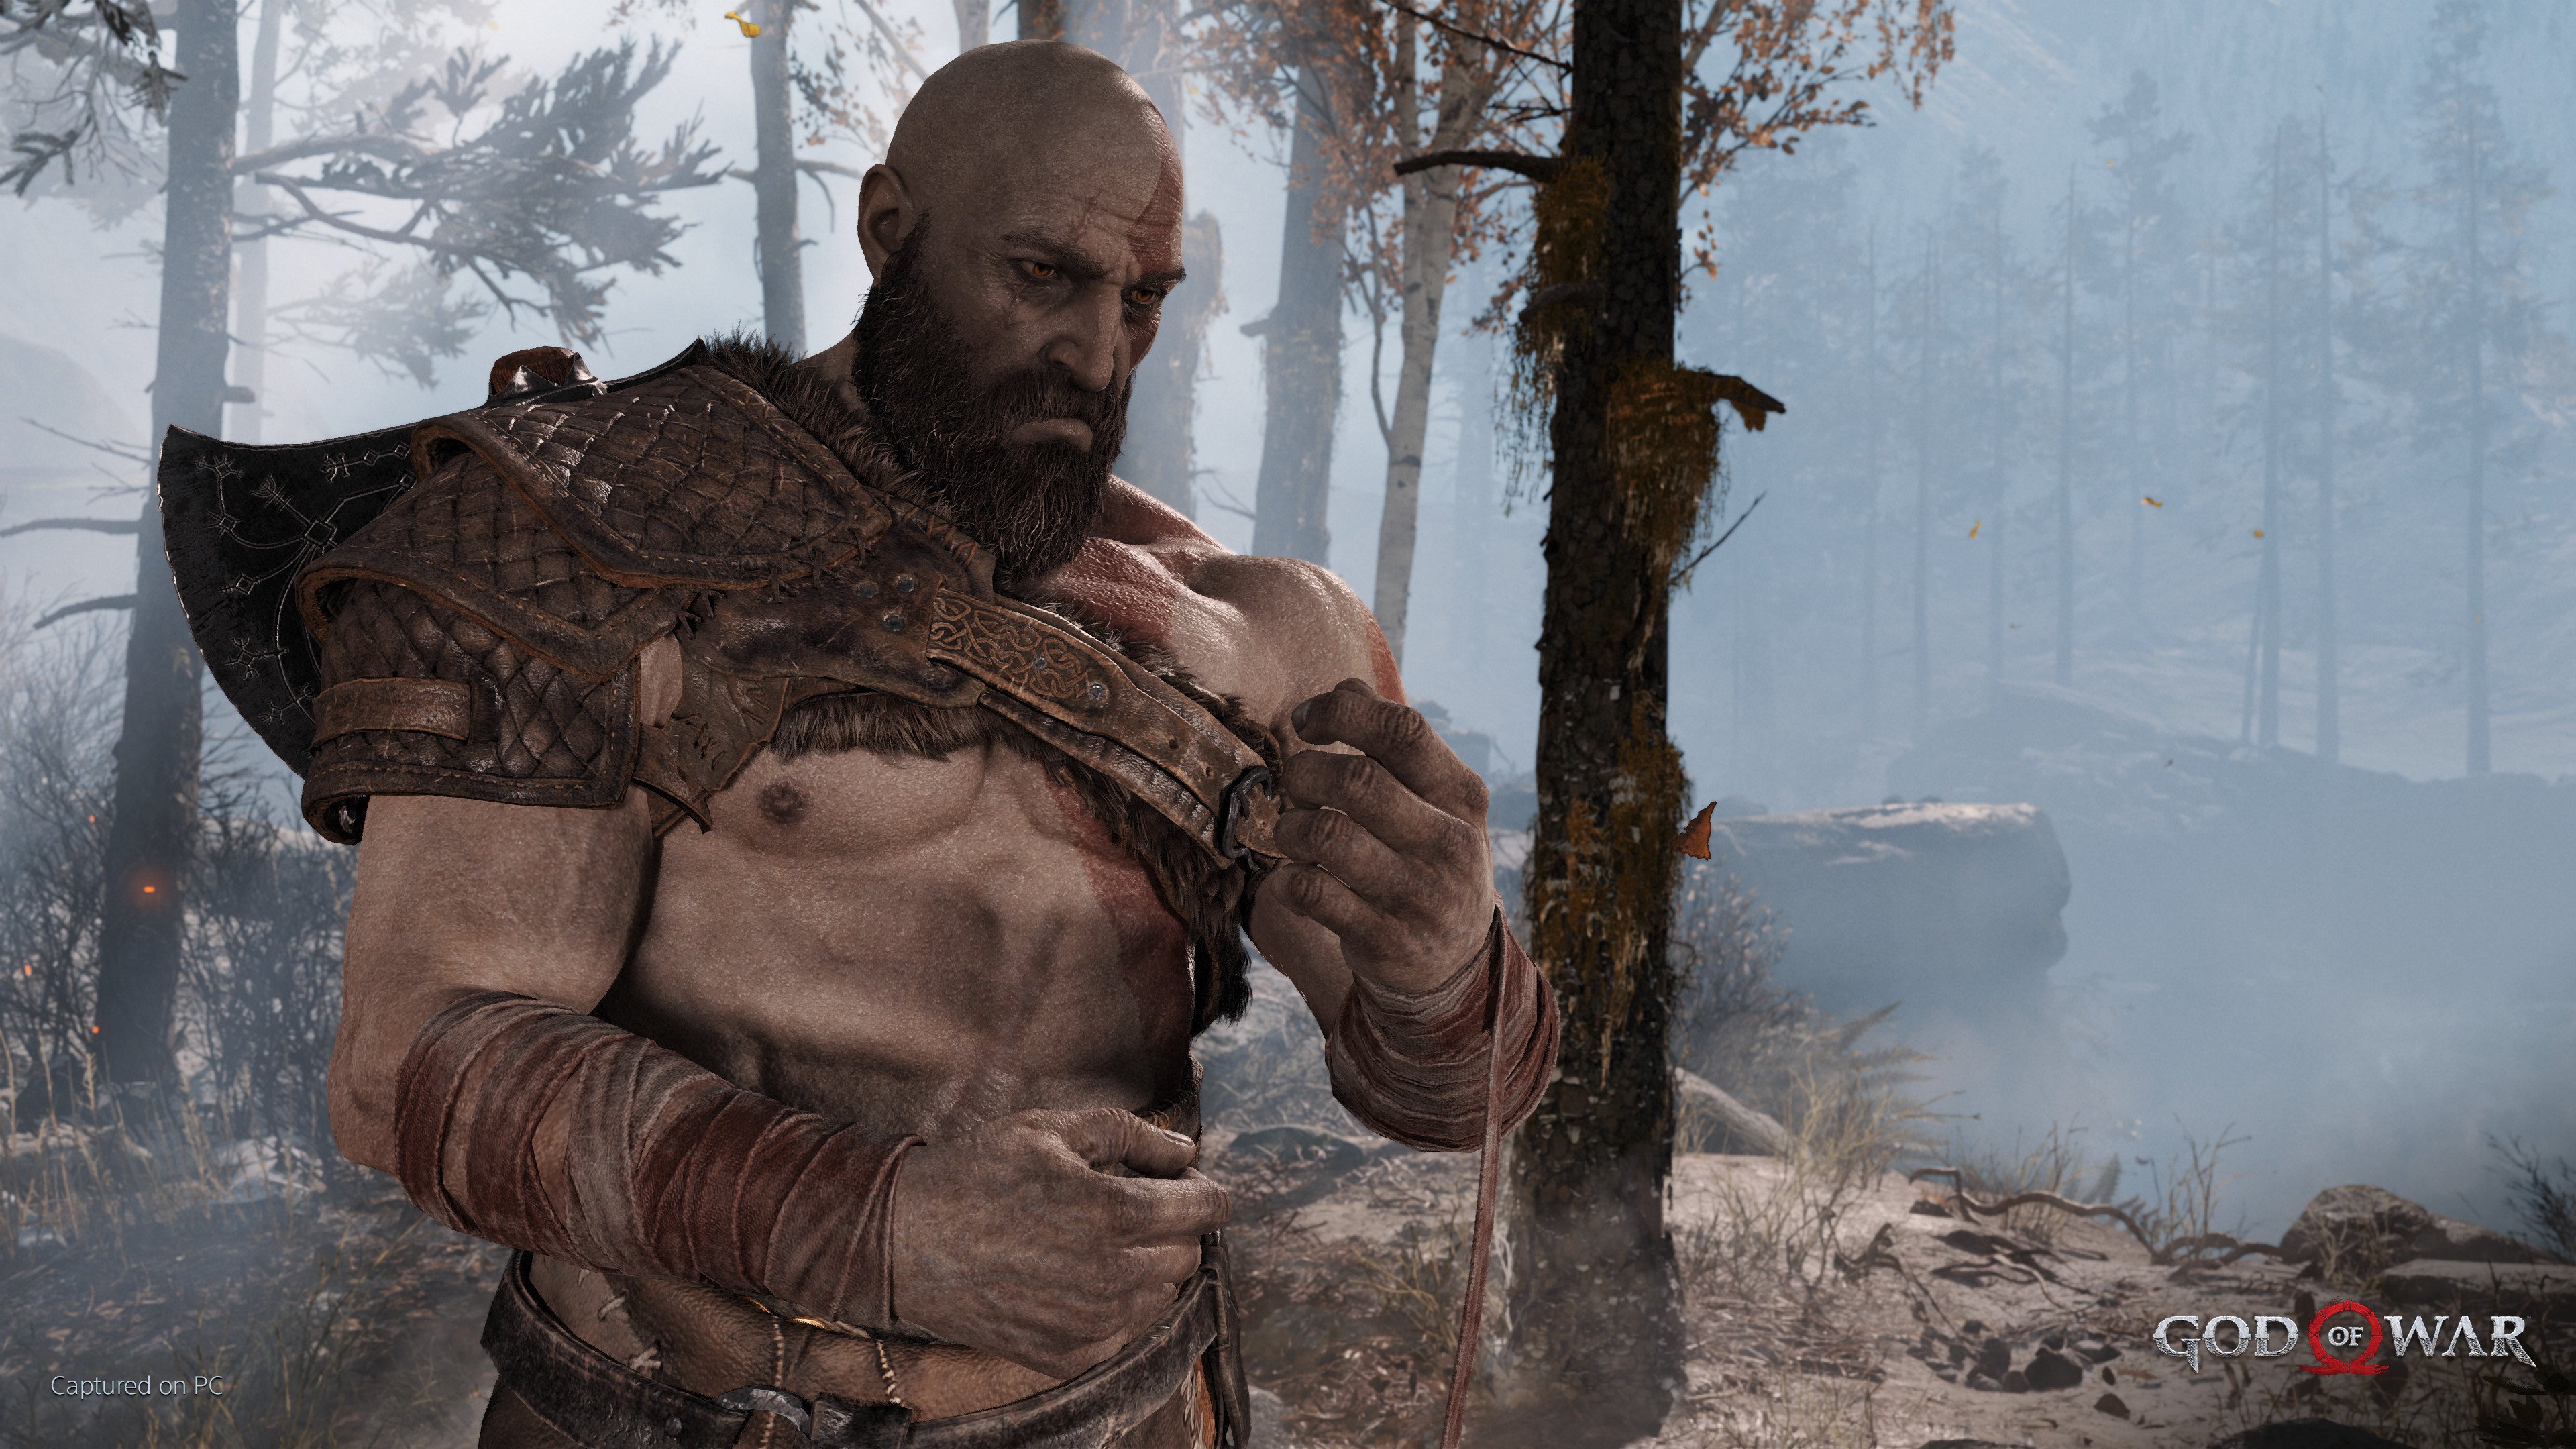 God of War Coming to PC on January 14th, 2022